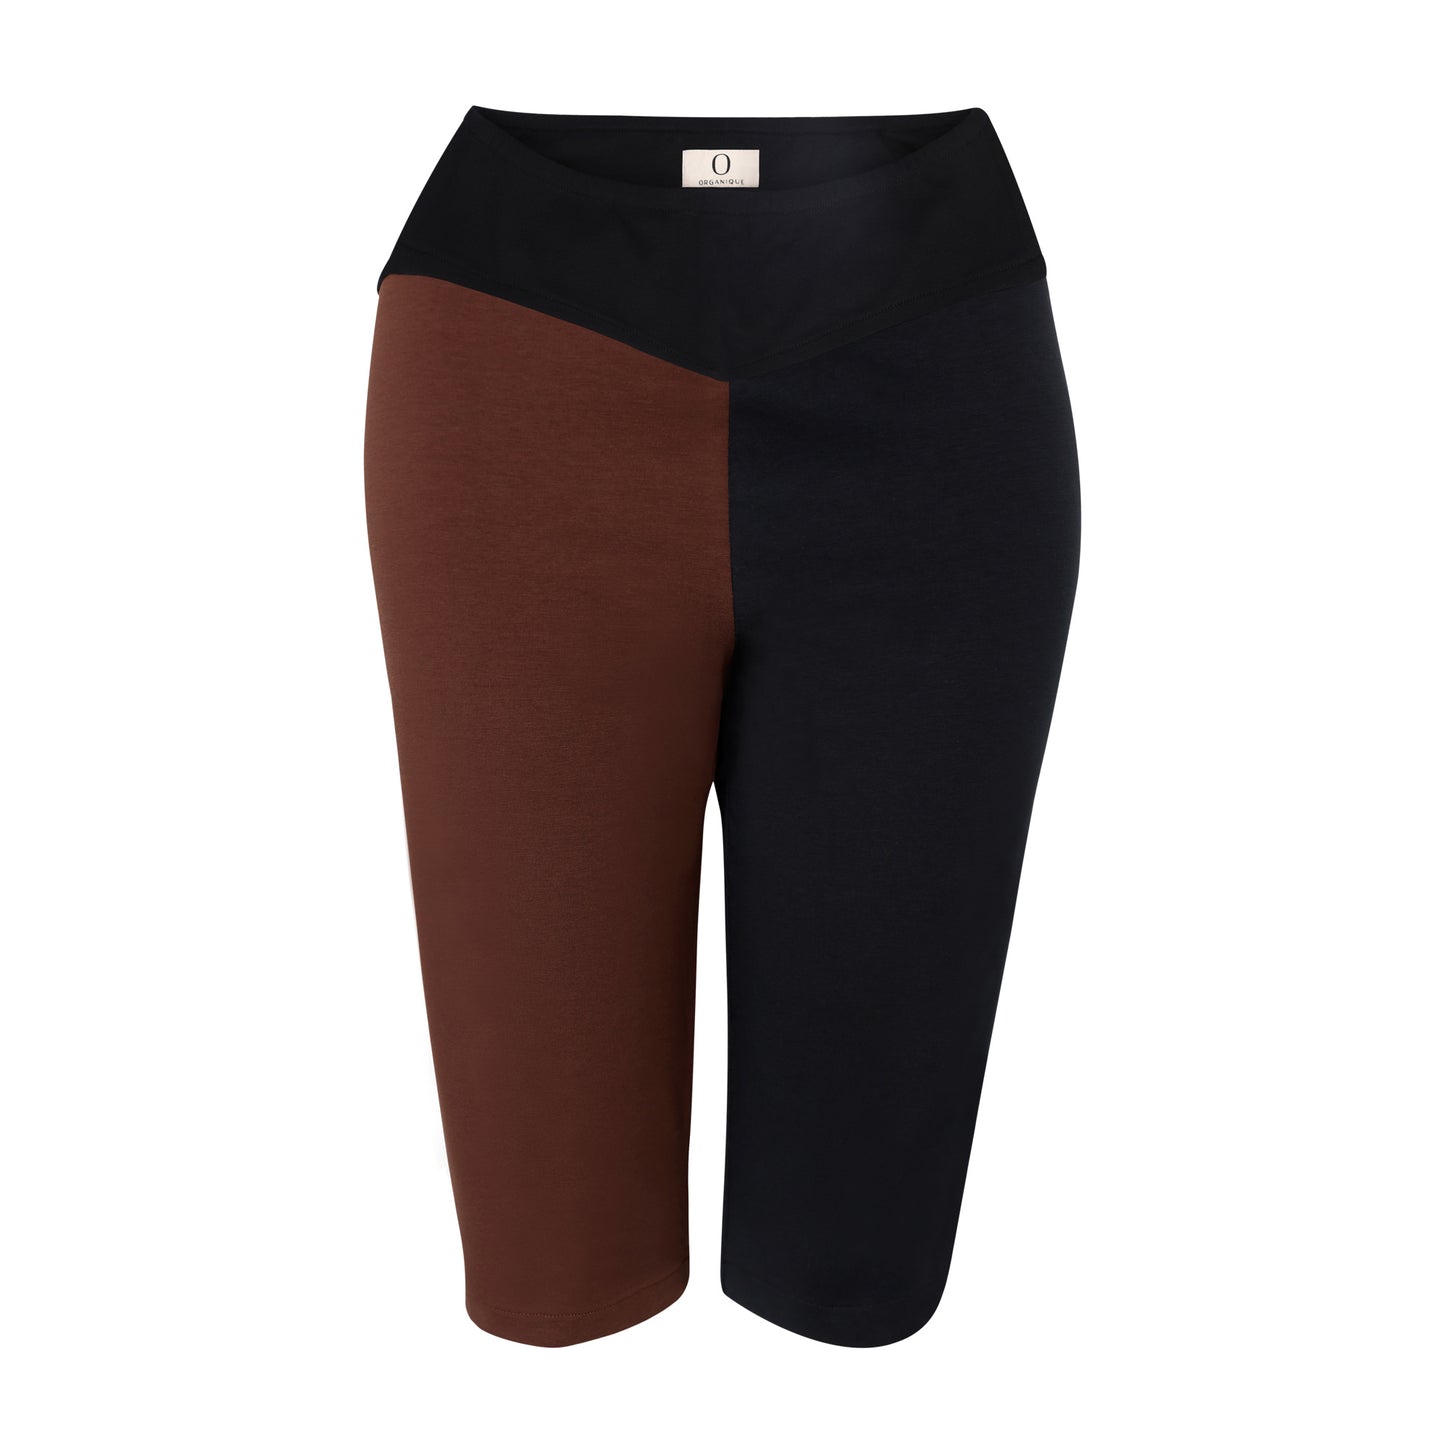 Image of black and brown organic cycling shorts made by Organique, a sustainable clothing brand.